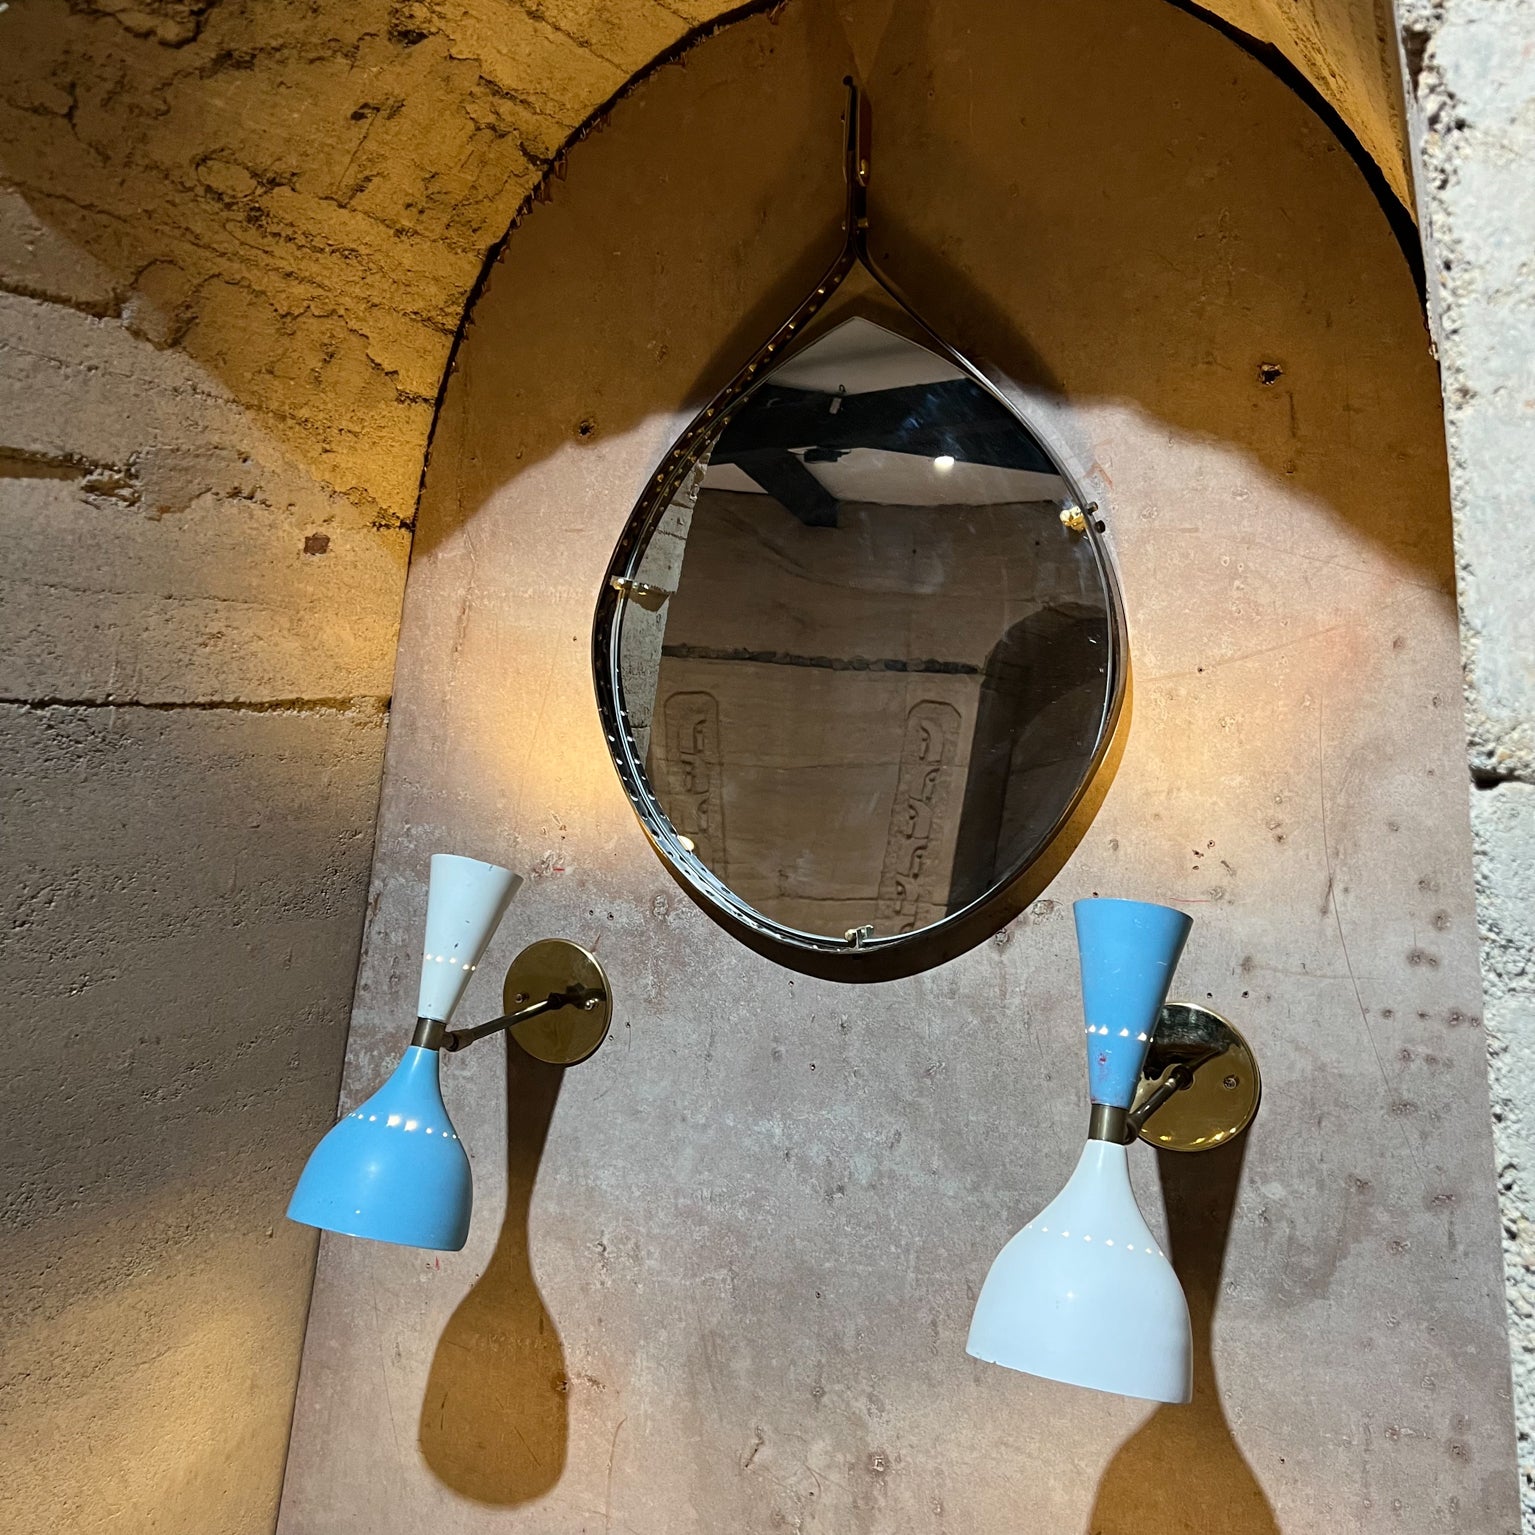 1950s Sensational Vintage lamps Blue and White with Brass Double Cone Wall Sconces from ITALY
Unmarked, attribution Stilnovo.
11.25 tall x 5 w x 8 d
Preowned unrestored original vintage condition.
Please refer to images provided.
 